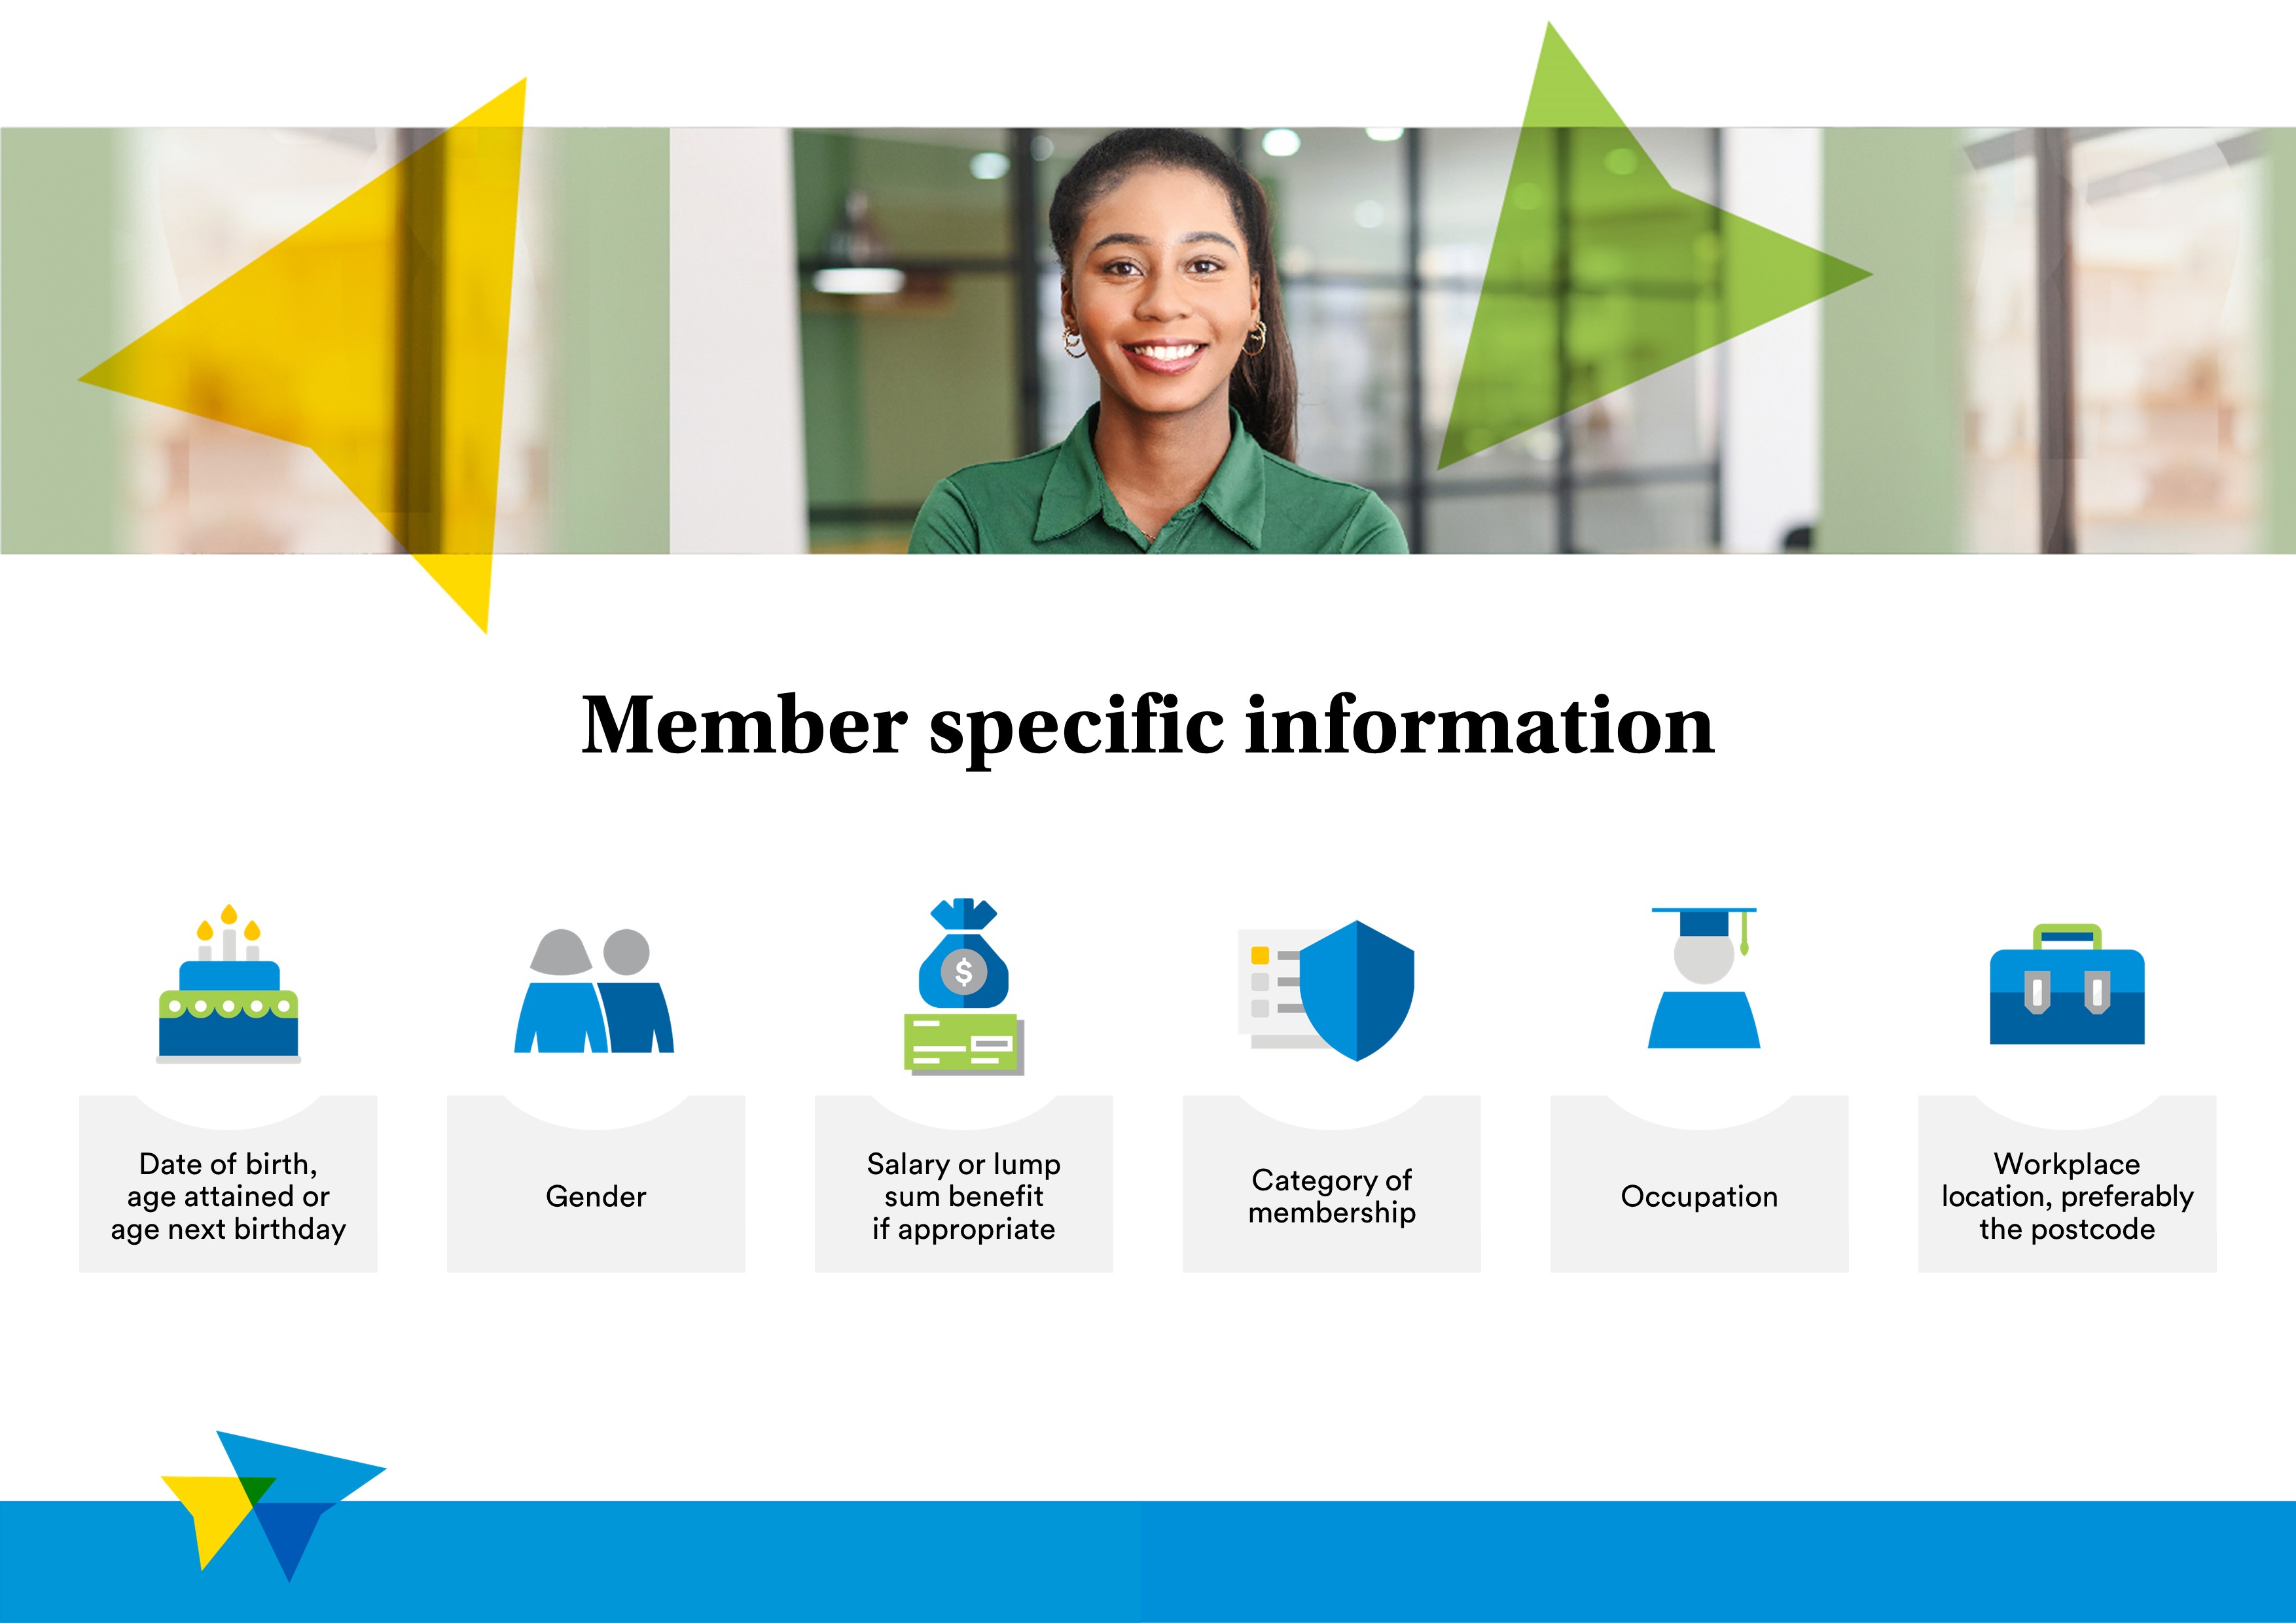 Member specific information. The information required on members includes: data of birth, age attained or age next birthday, gender, salary or lump sum benefit if appropriate, category of membership, occupation and workplace location, preferably the postcode.